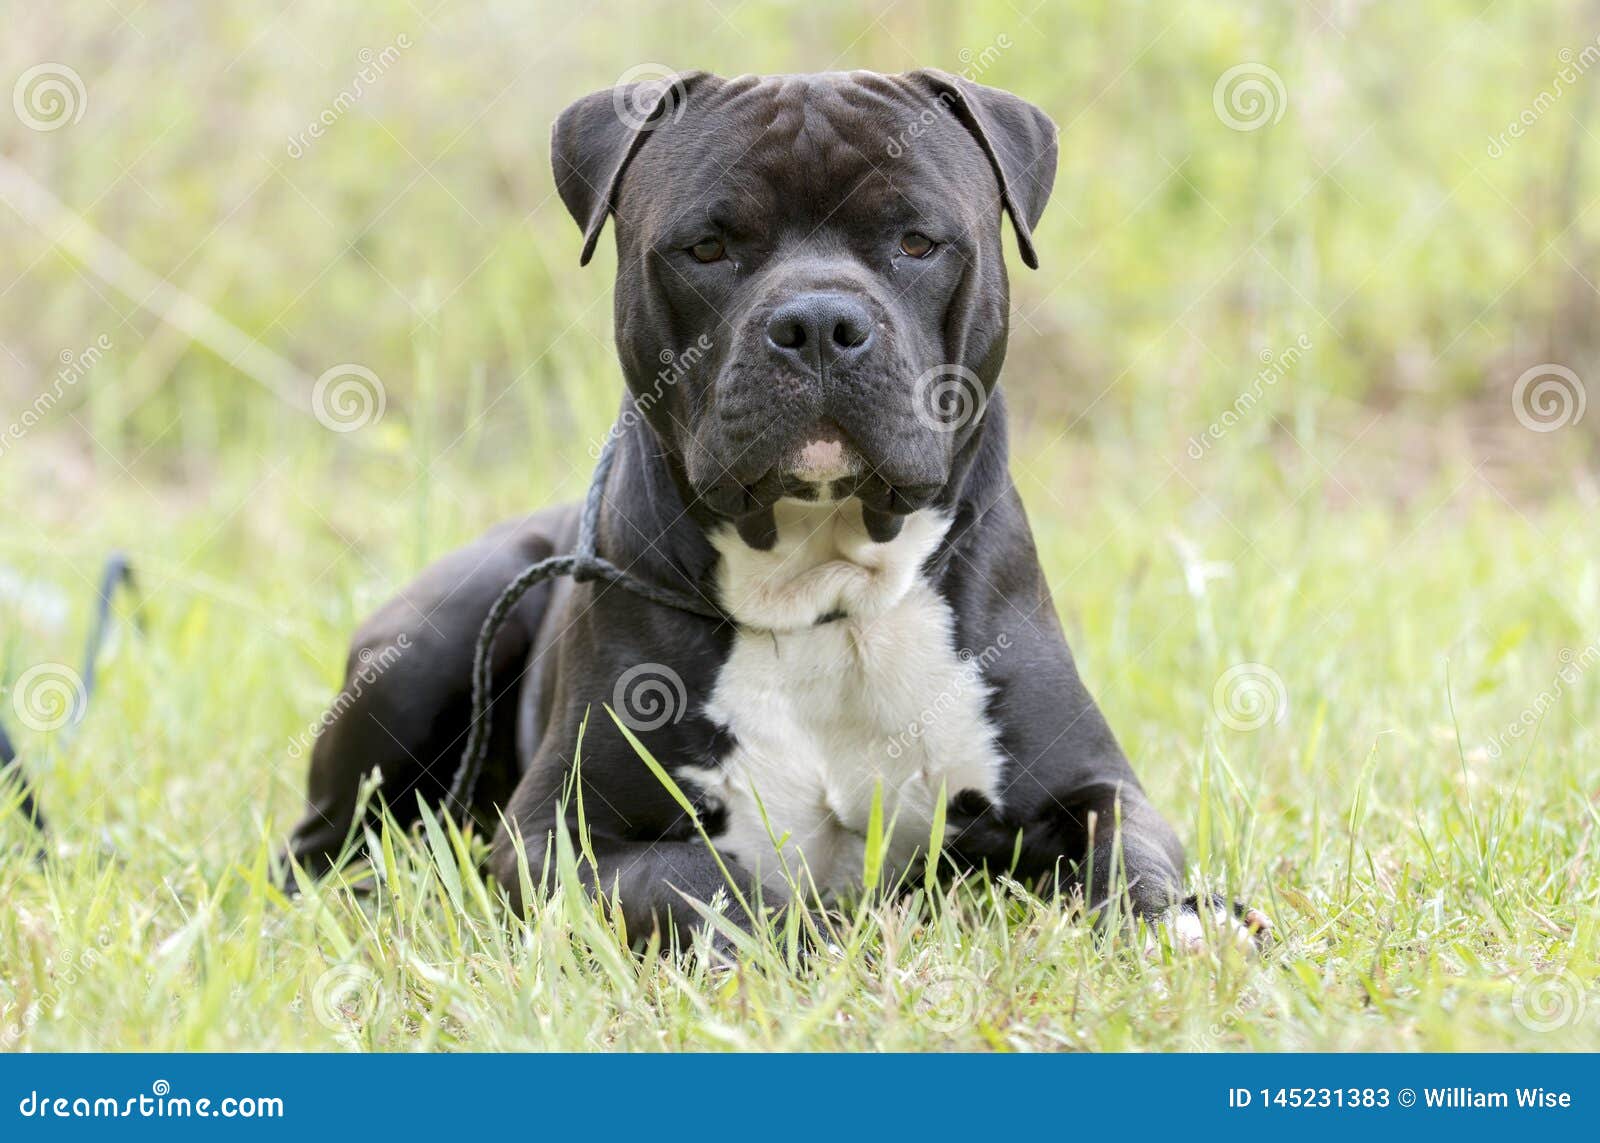 Large Black Cane Corso And Pitbull Terrier Mix Dog Stock